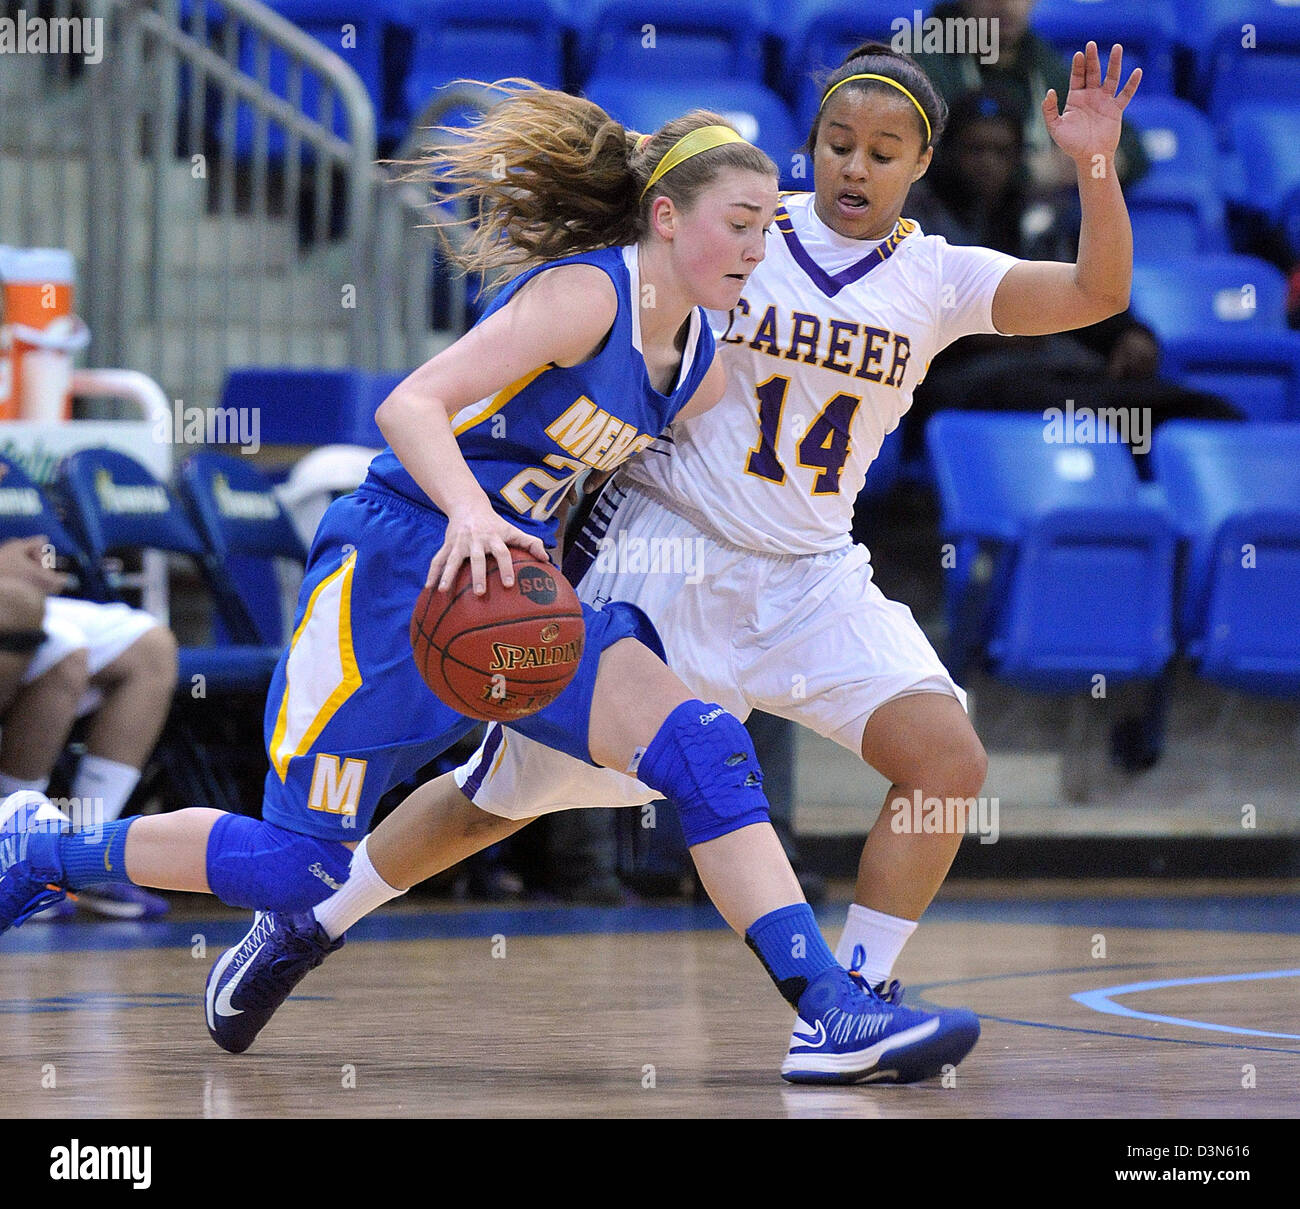 Championship girls high school basketball game dans CT USA Banque D'Images